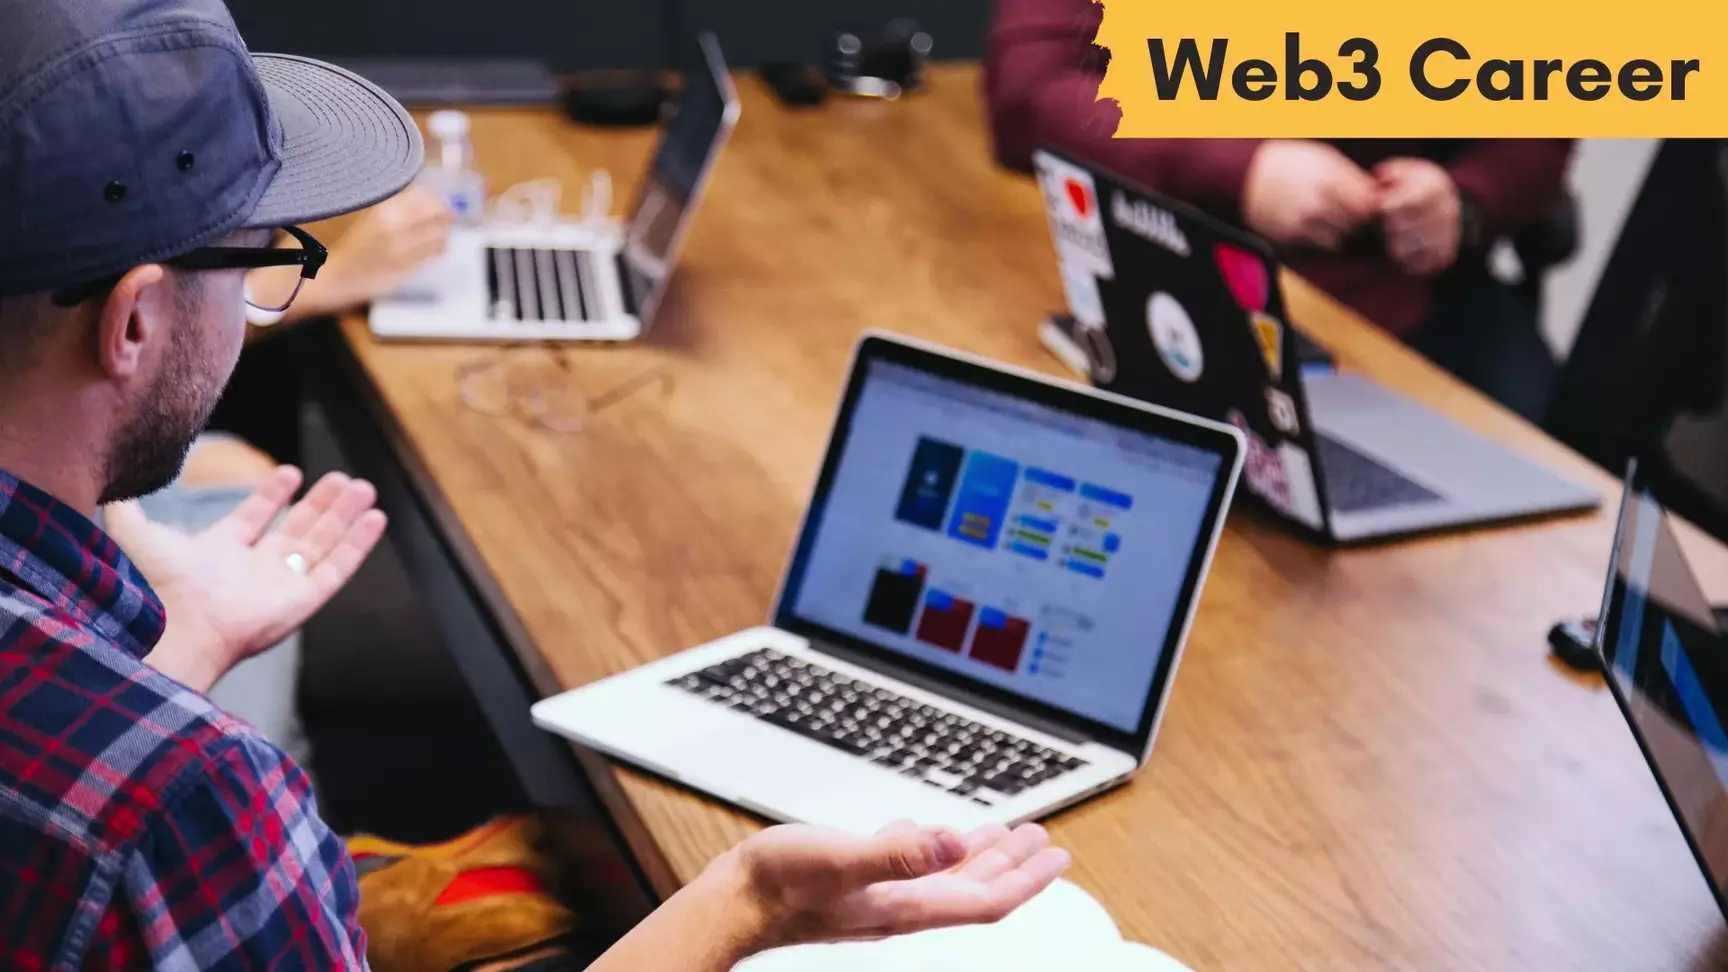 Building A Career In Web3: Skills And Opportunities